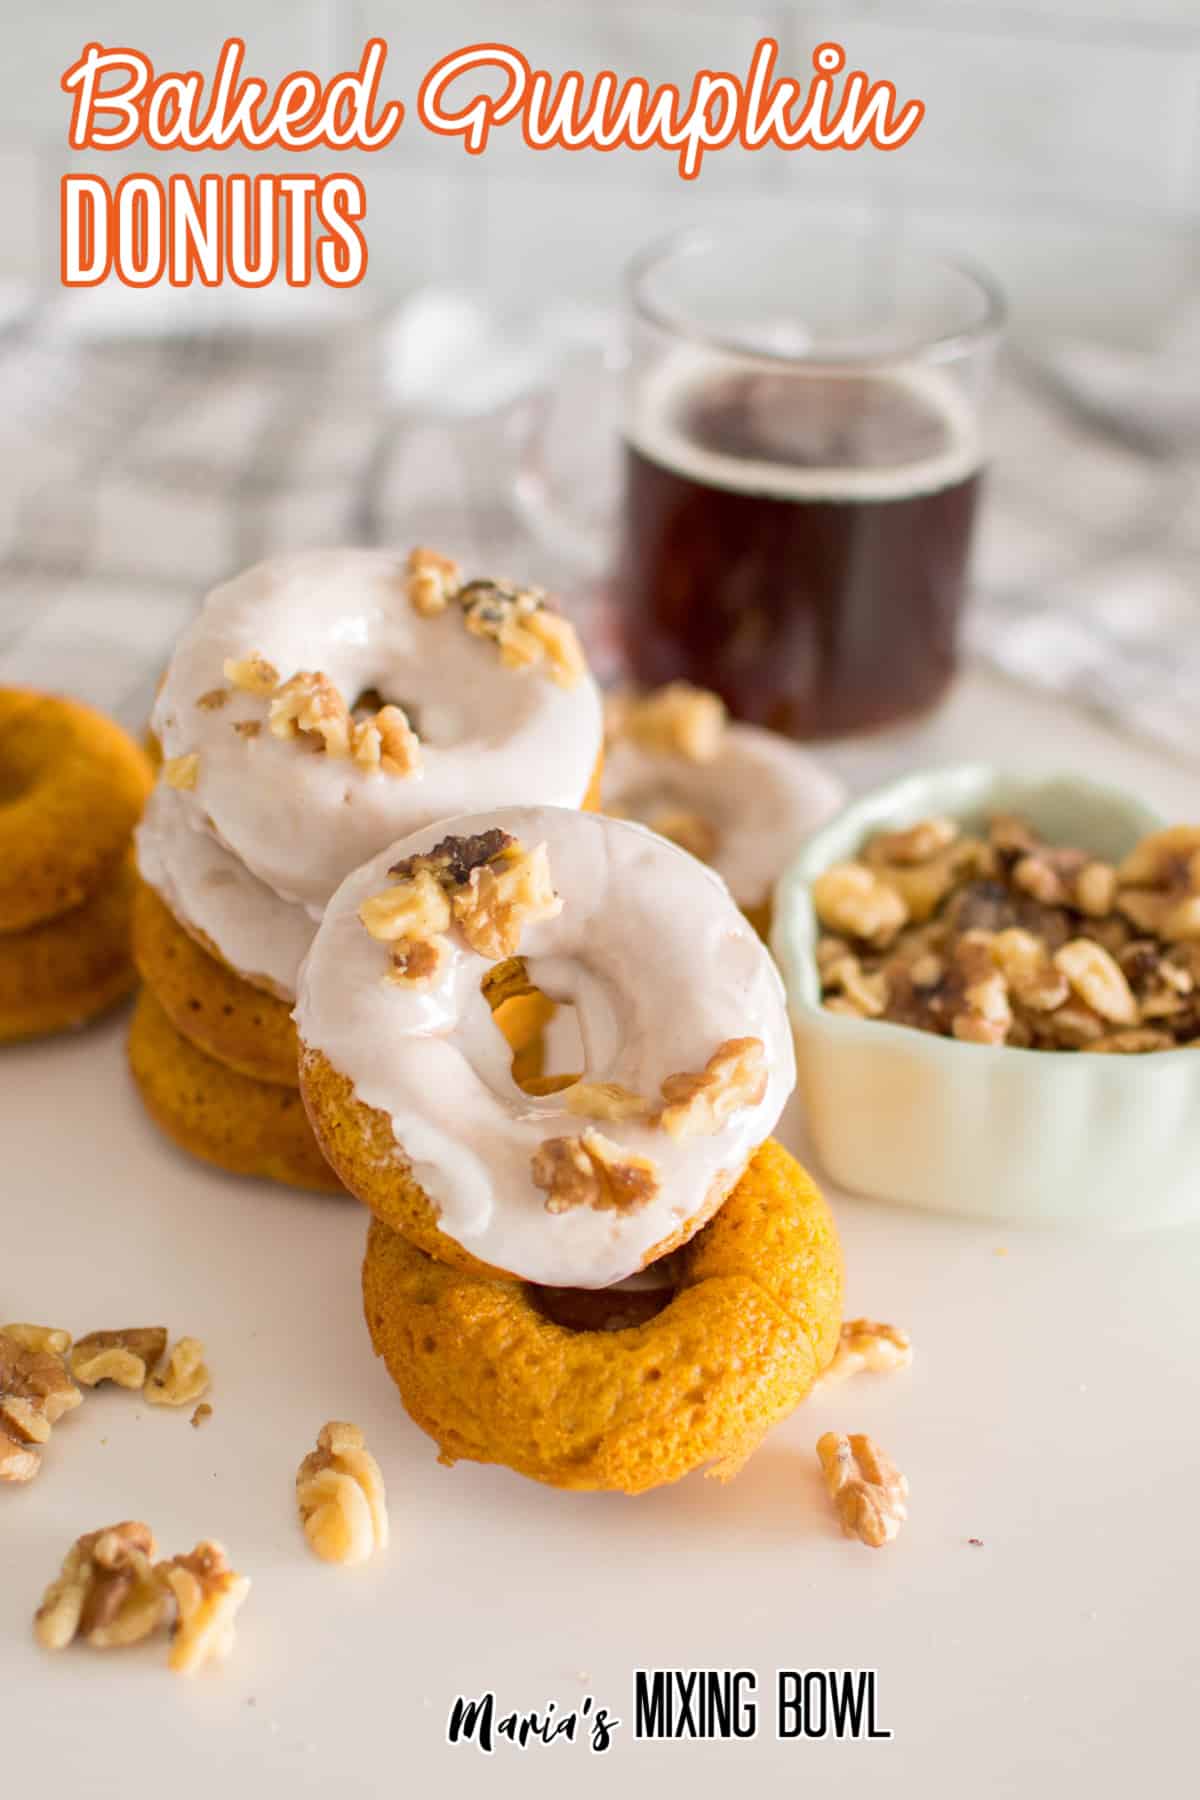 stack of baked pumpkin donuts on a white background with the name in text for pinterest